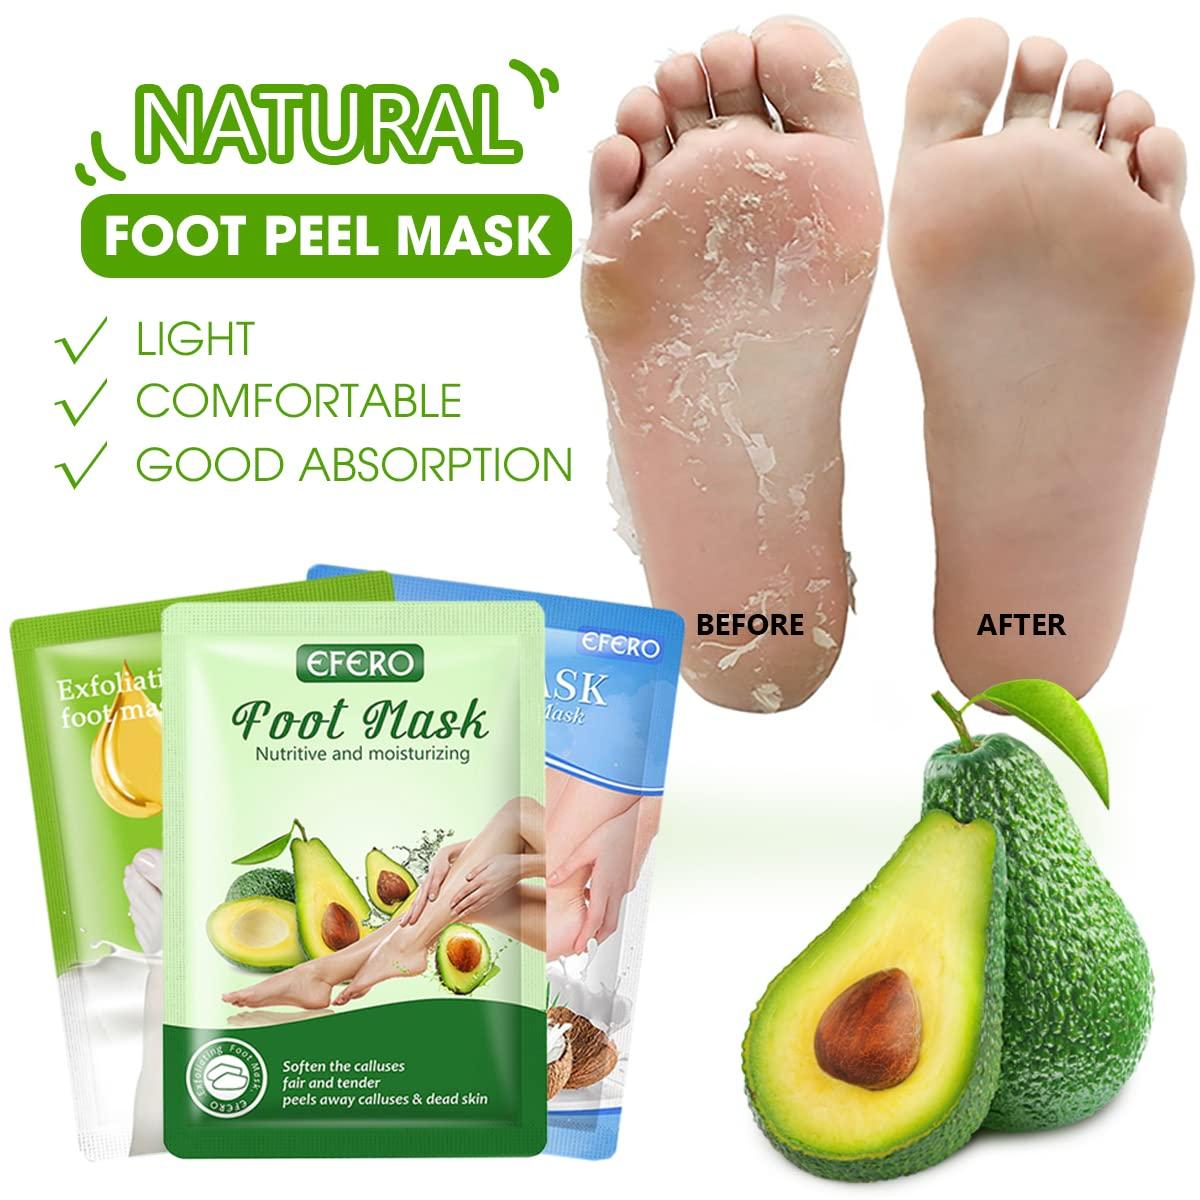 Horse Oil Foot Mask Gently Exfoliates Dead Skin And Calluses